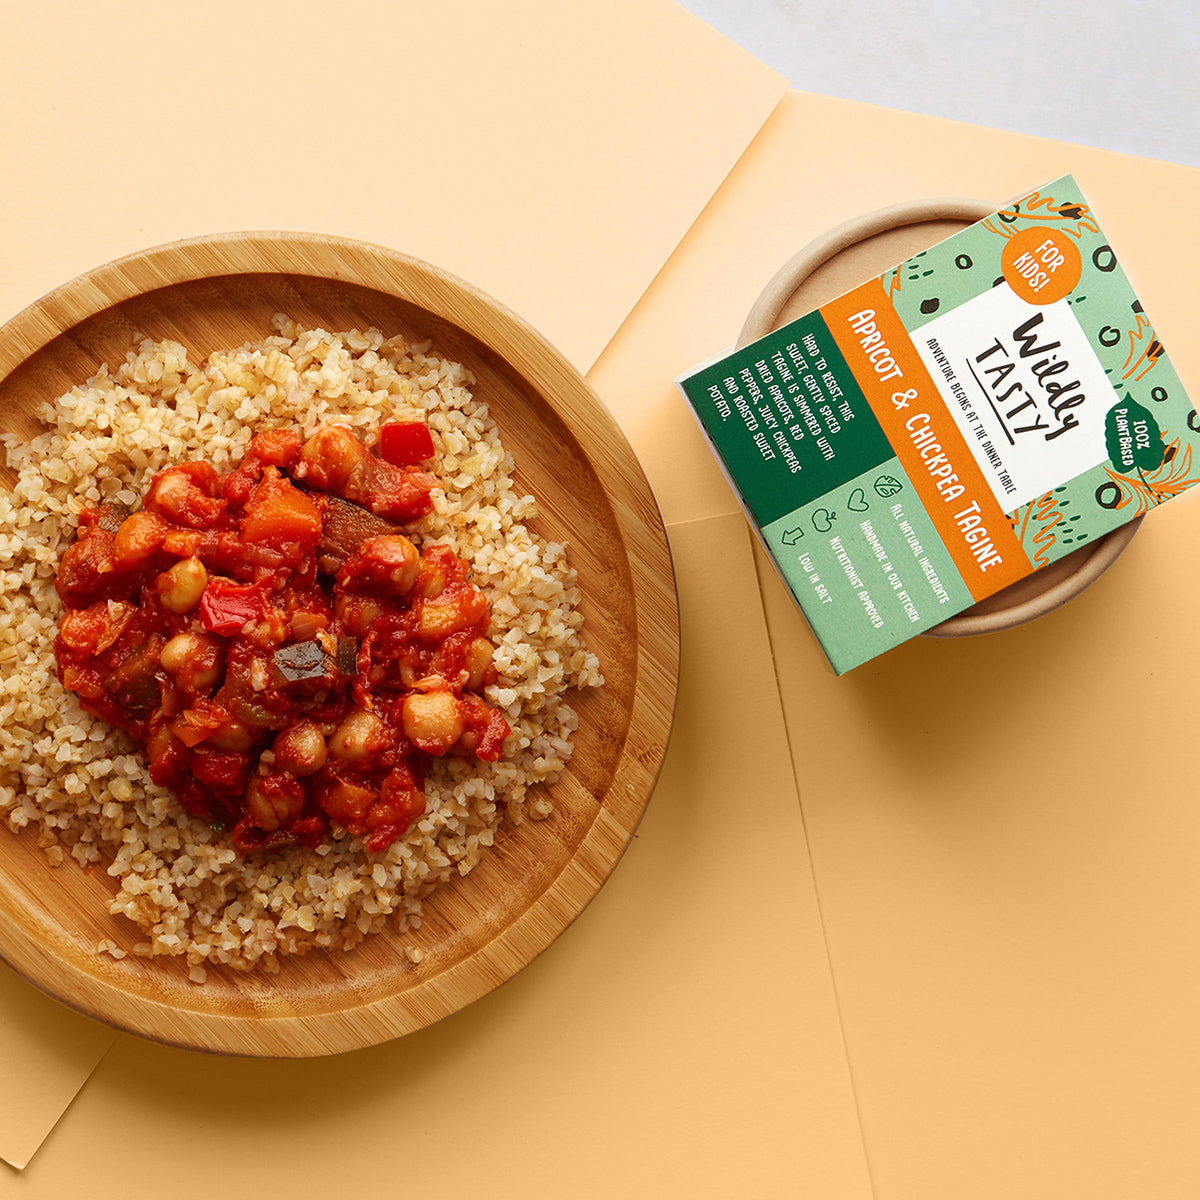 Wildy Tasty Kids Apricot and Chickpea Tagine